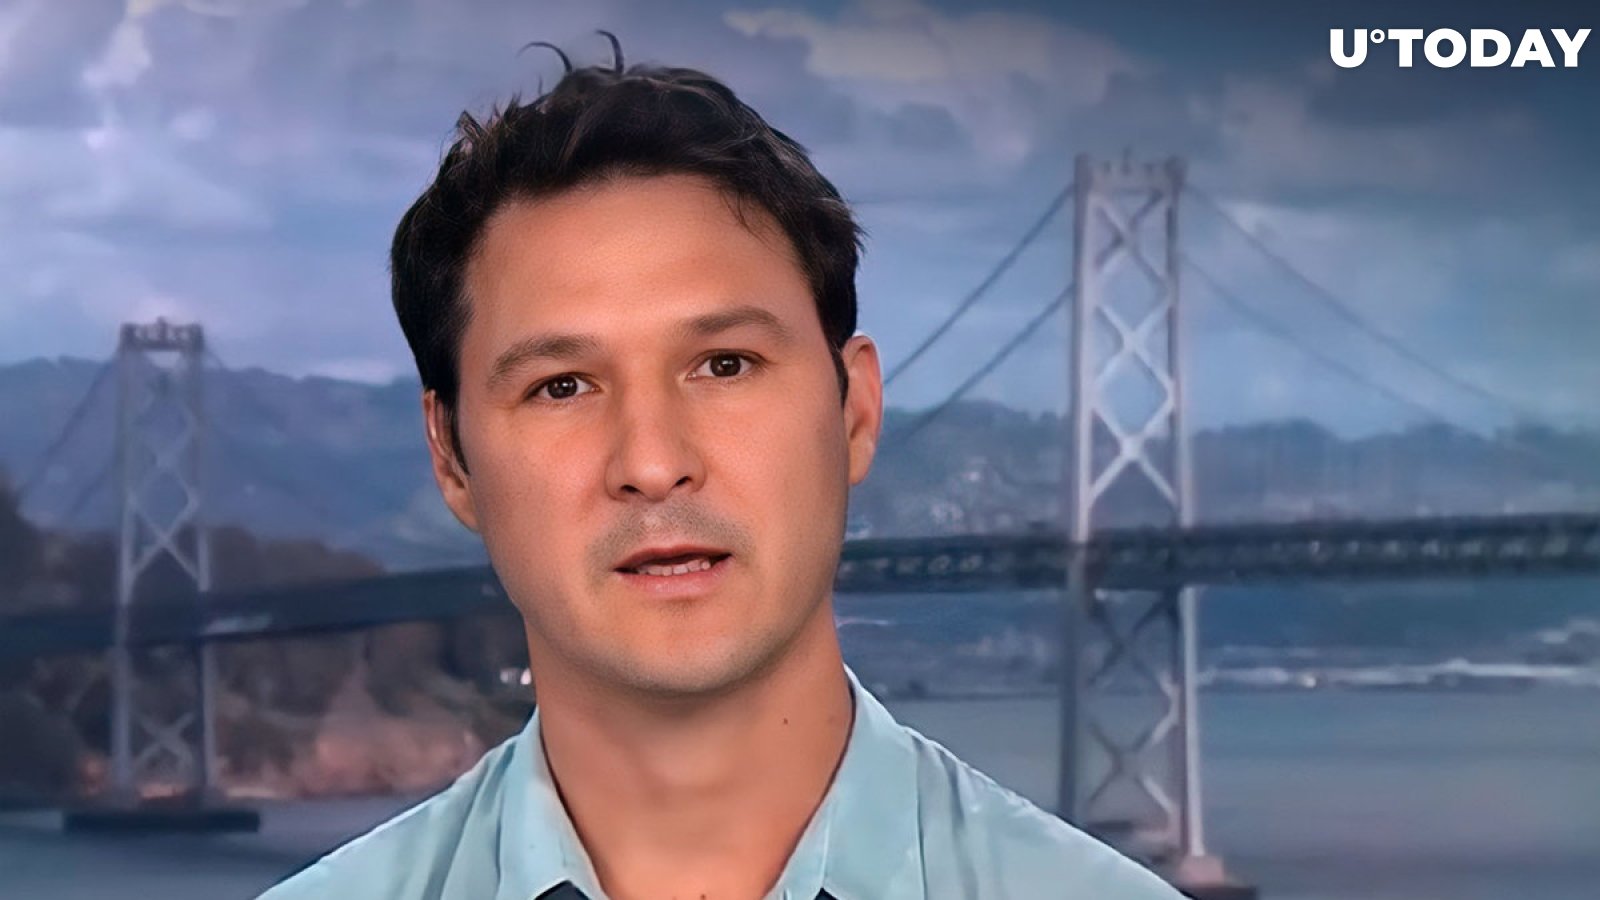 Ripple Co-Founder Jed McCaleb Made U-Turn on Selling His Last 5 Million XRP; Here's Why